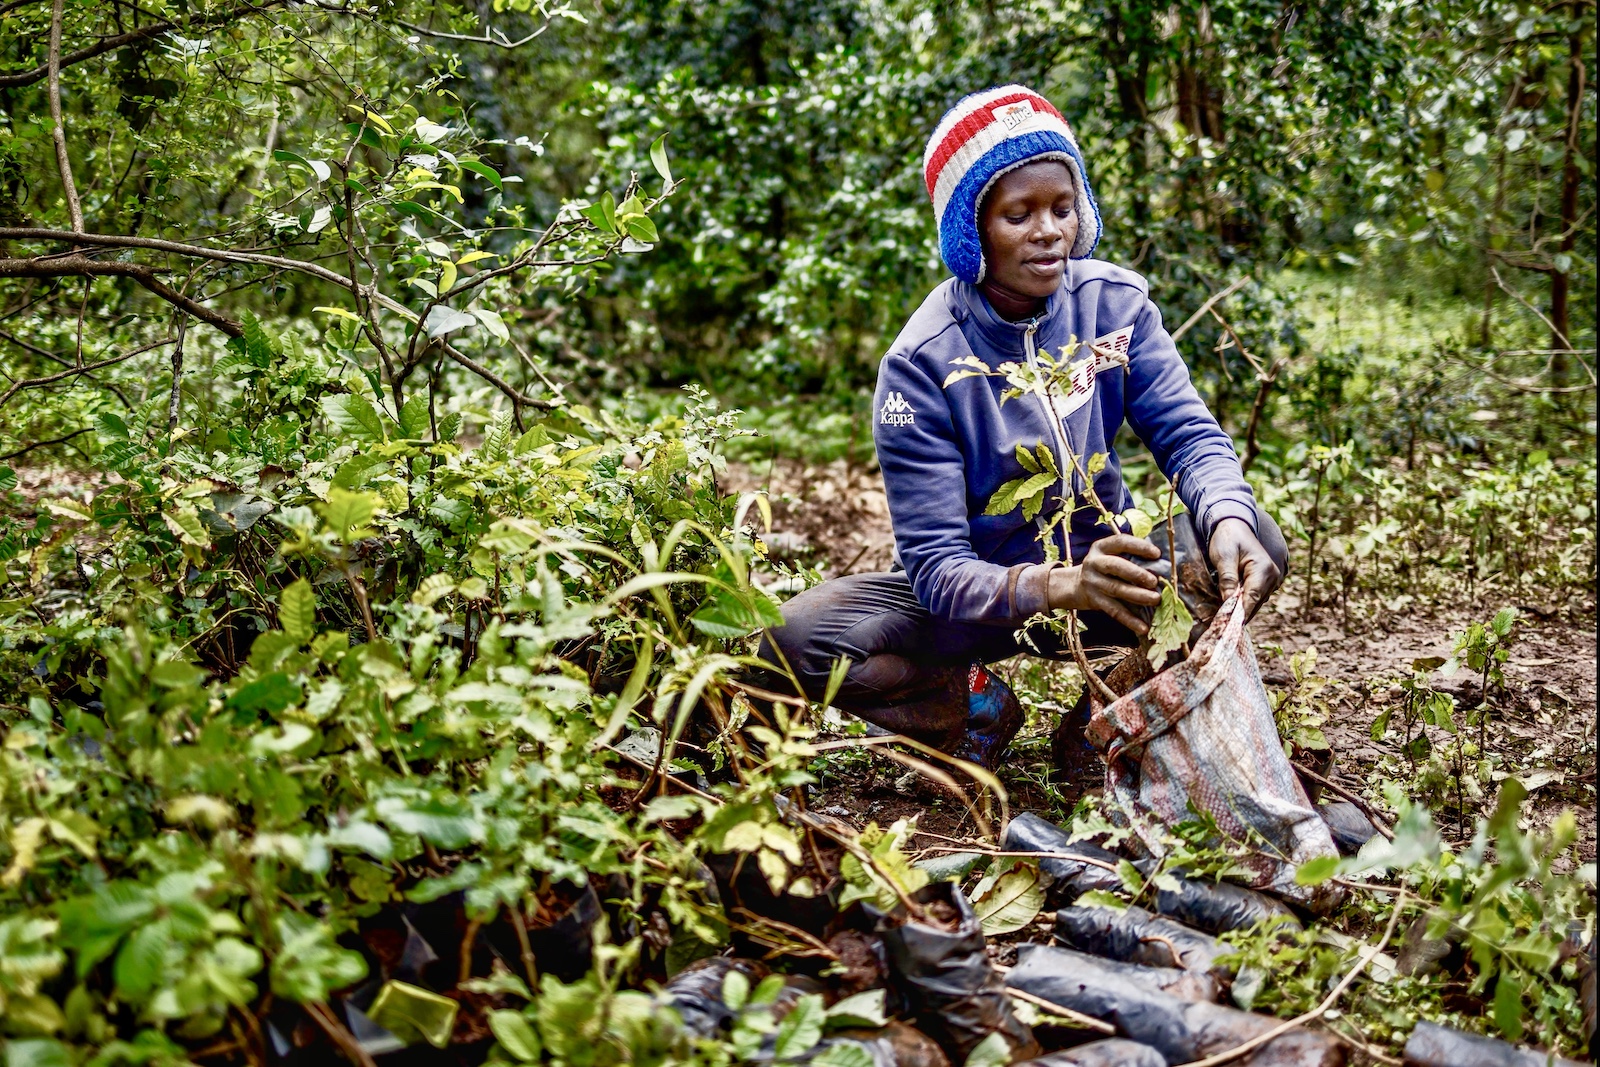 Kenya Has Created A Public Holiday For People To Plant 100 Million Trees To Fight Climate Change